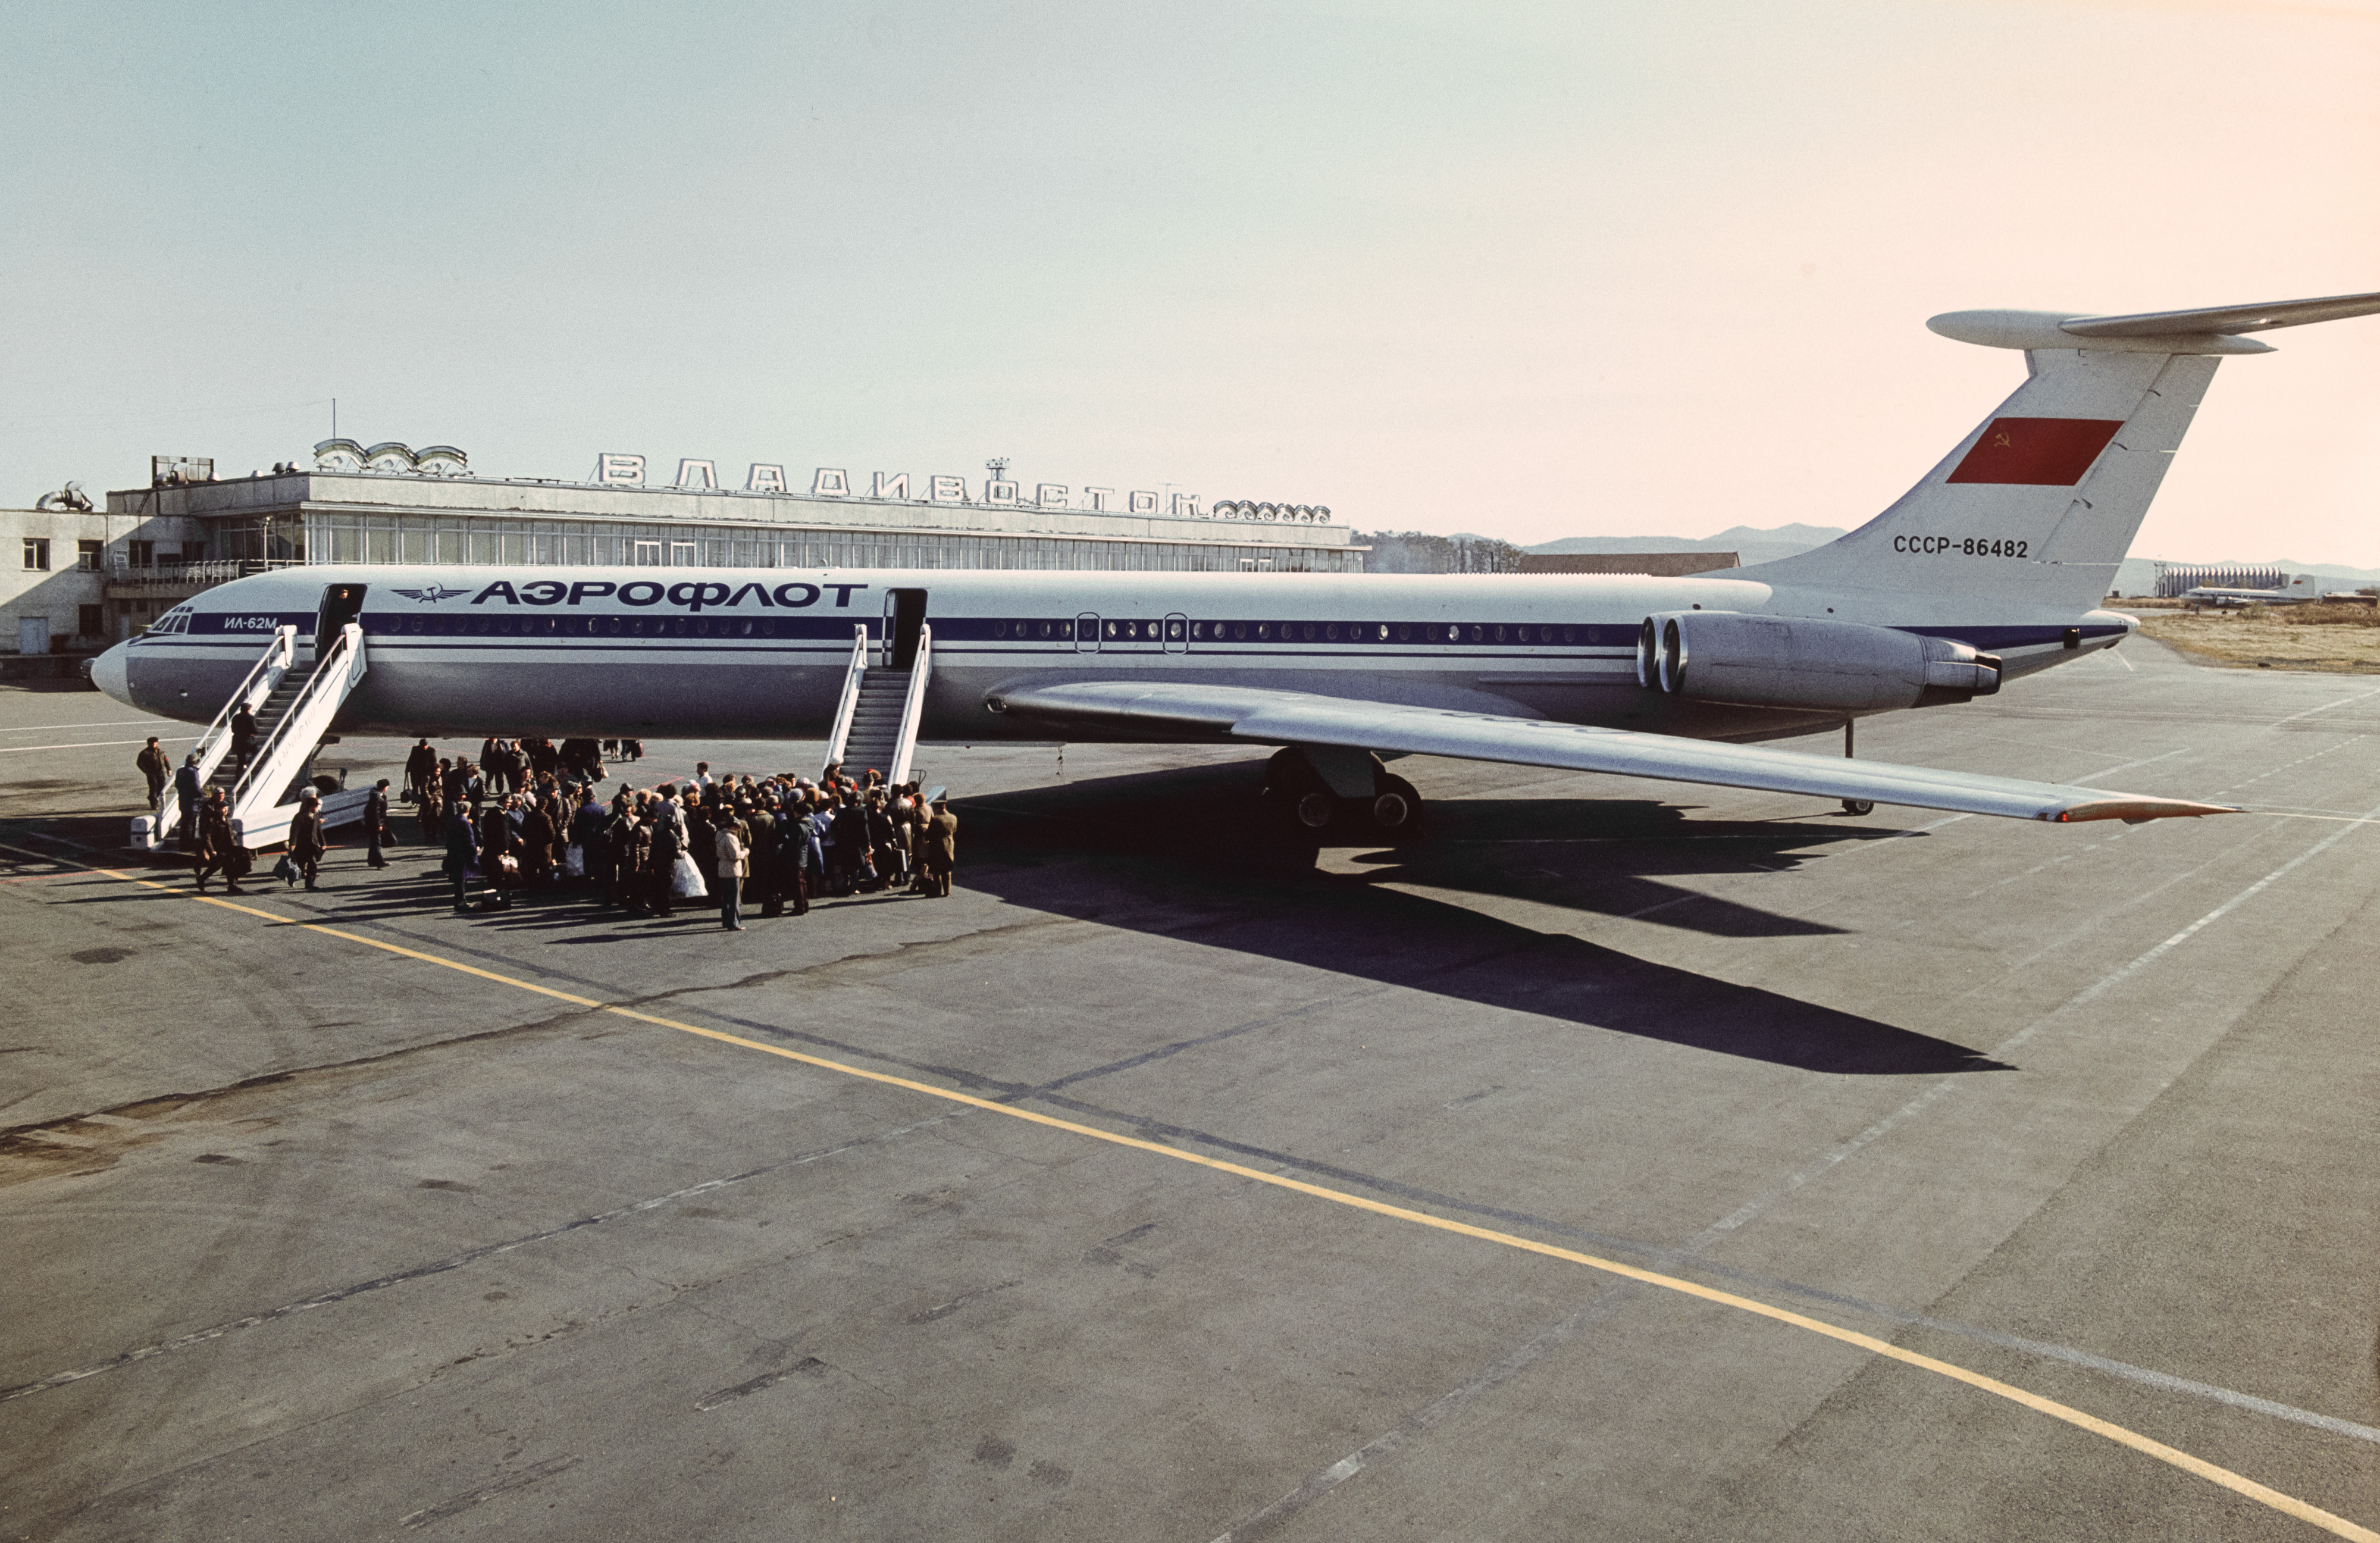 The-start-of-an-8-hour-trip-to-Moscow-is-boarding-at-Vladivostok-this-Il-62M-served-Aeroflot-its-entire-life-from-April-1978-until-May-1996-Transport-Images.jpg